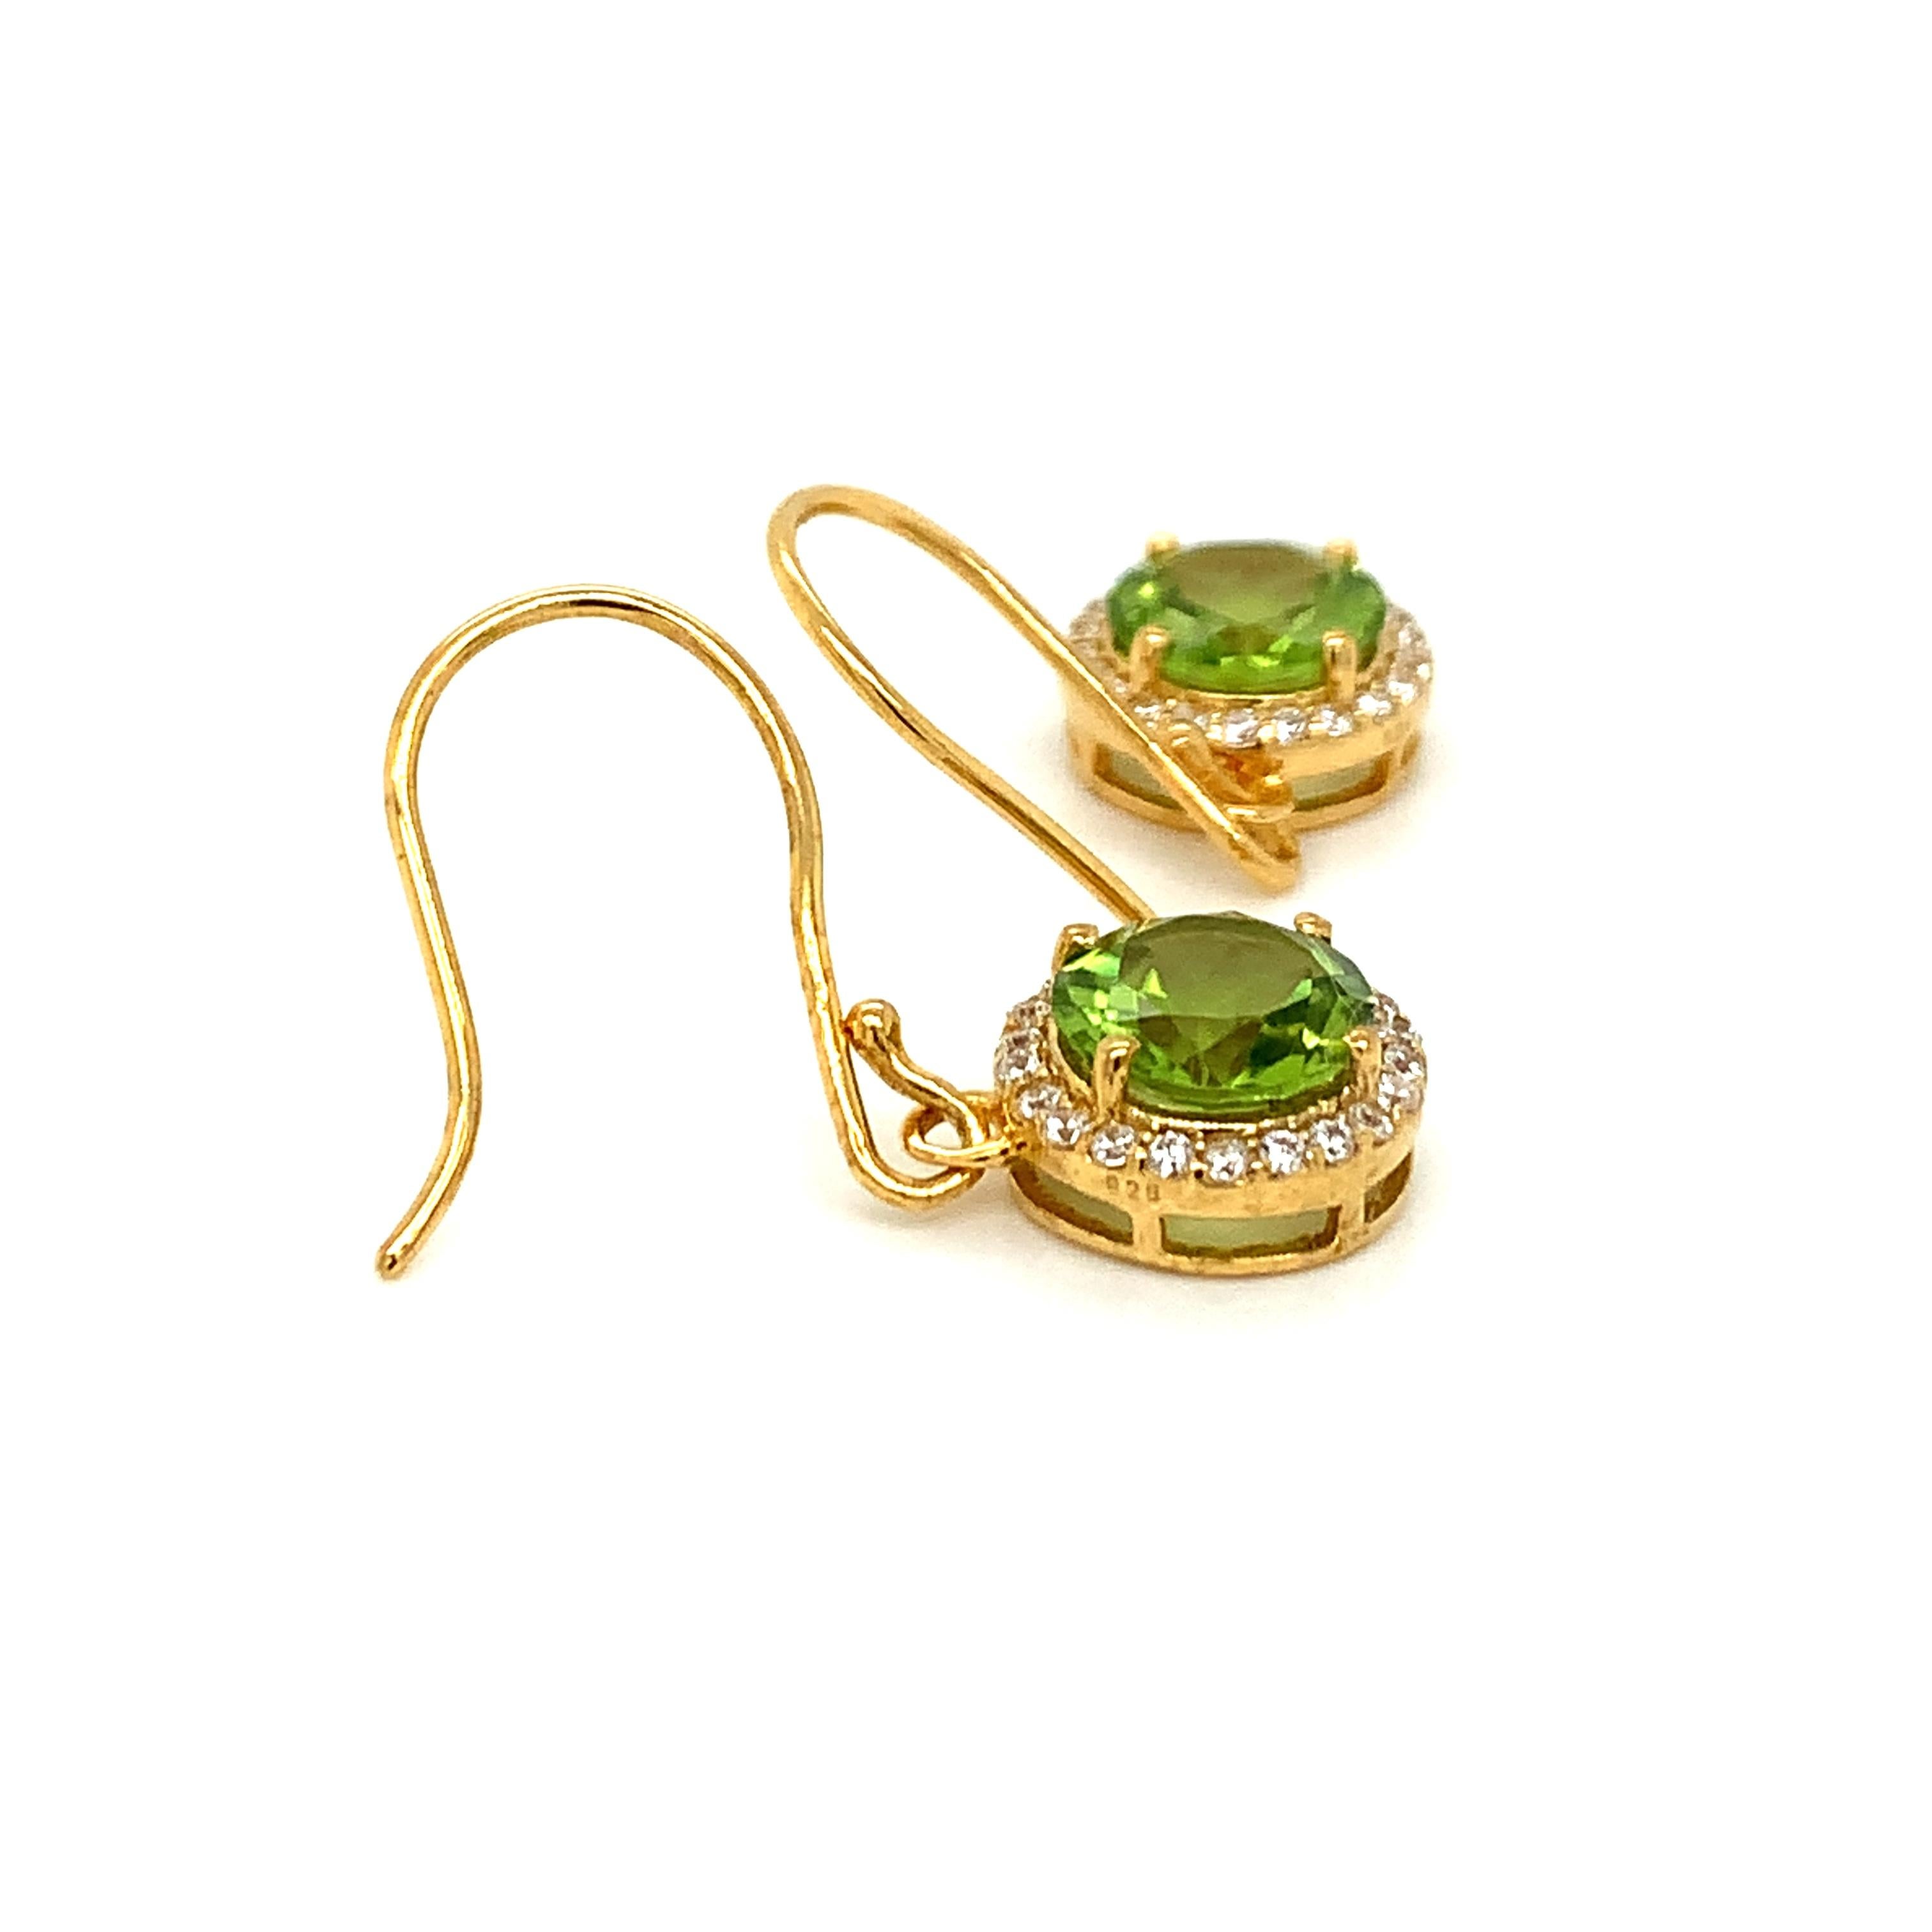 Round Shape Peridot Gemstone And CZ beautifully crafted  in a Earrings. A fiery Green Color August Birthstone. For a special occasion like Engagement or Proposal or may be as a gift for a special person.

Primary Stone Size - 8x8 mm
